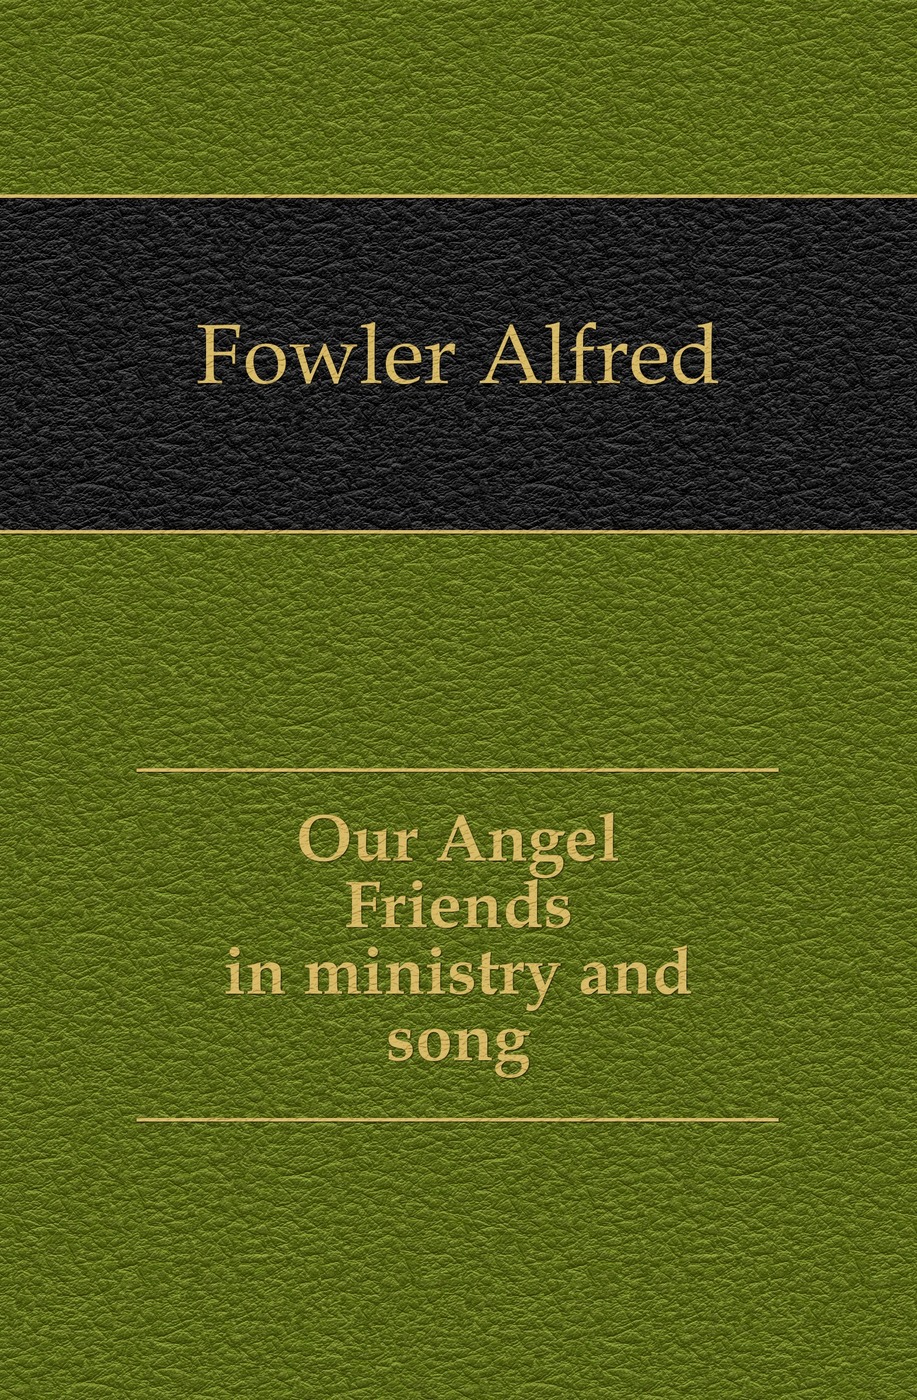 Our Angel Friends in ministry and song